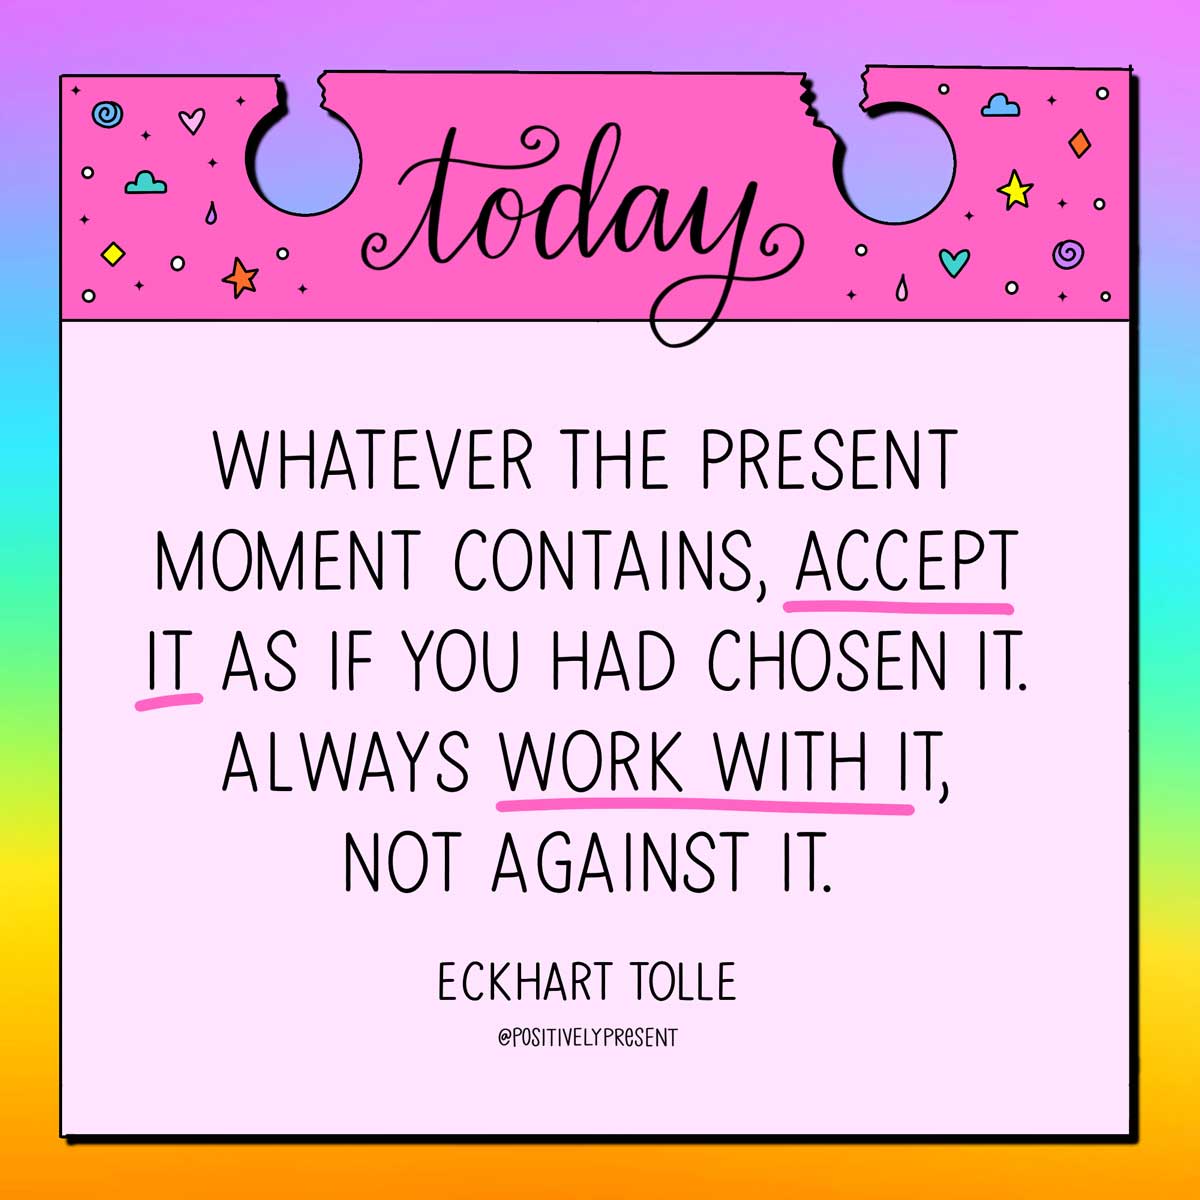 note on rainbow background says today accept whatever the present moment contains.